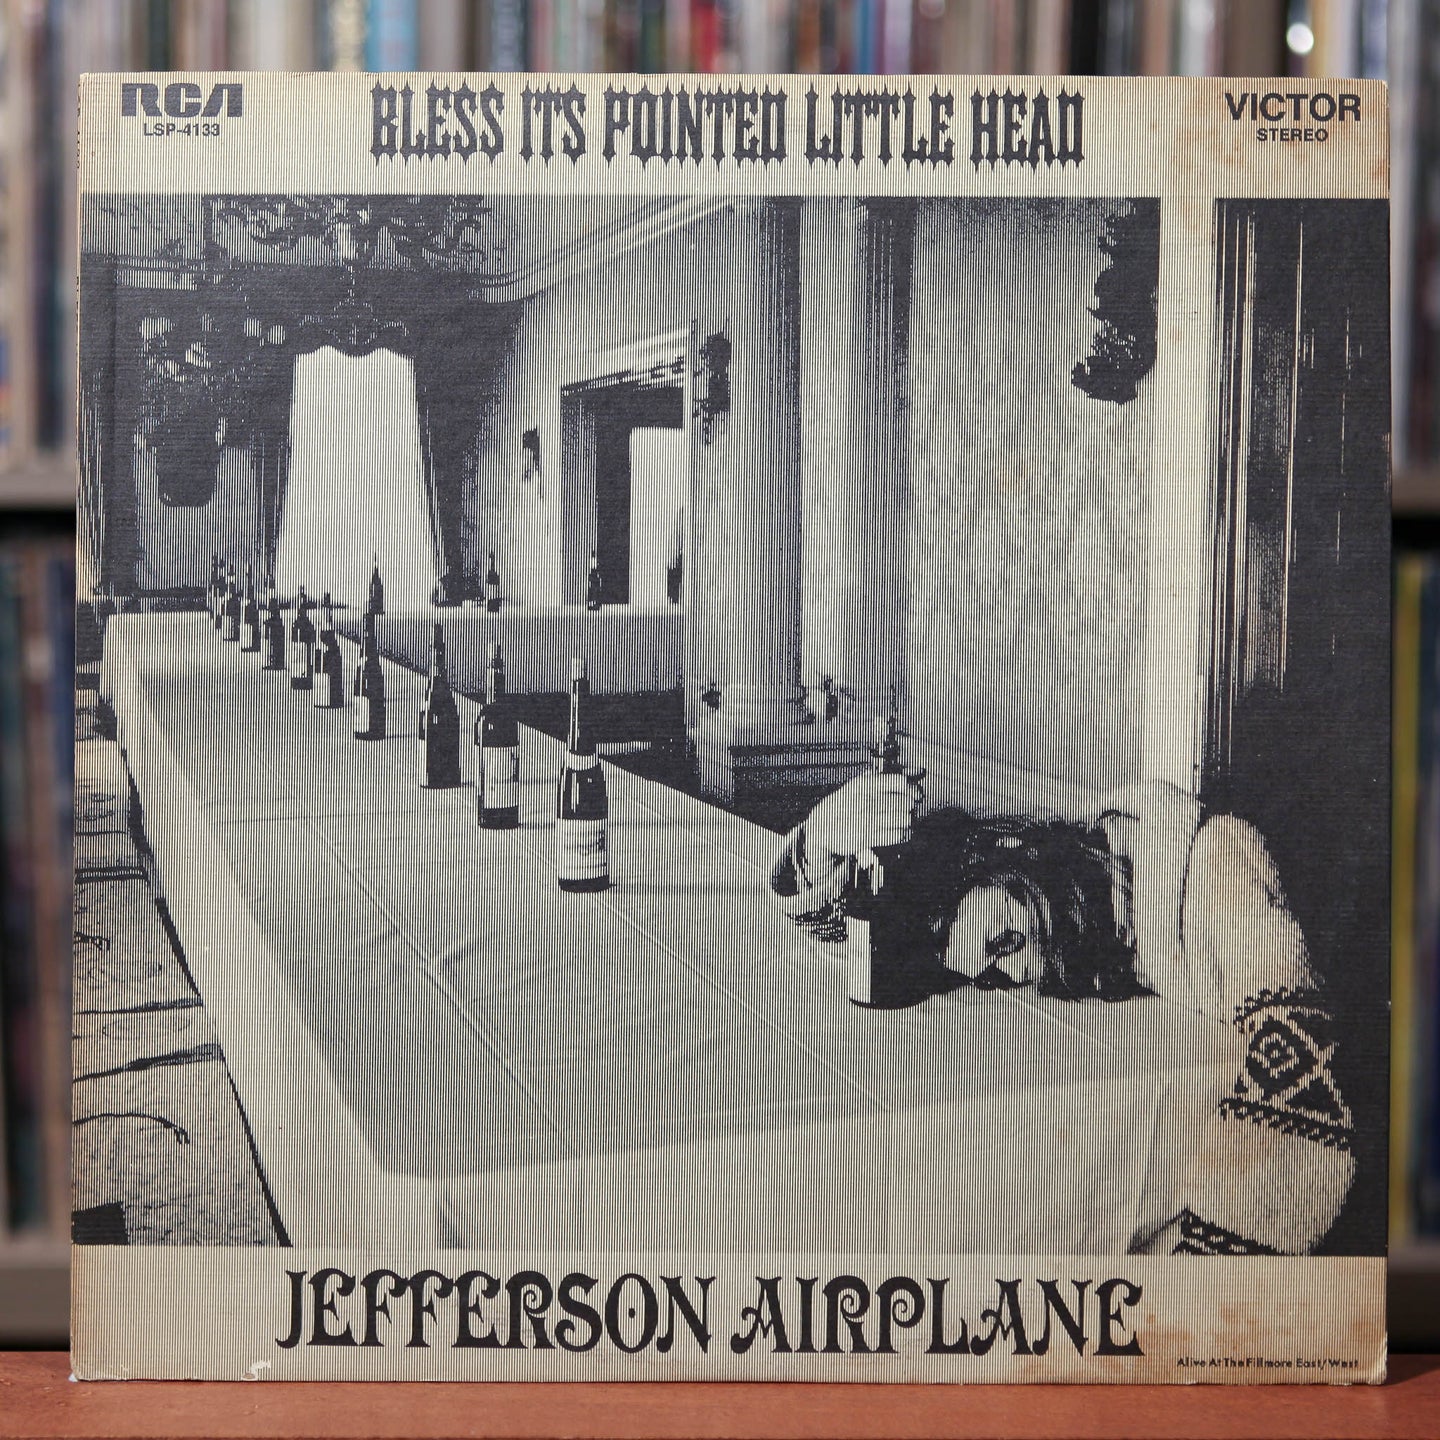 Jefferson Airplane - Bless Its Pointed Little Head - 1969 RCA, VG+/VG